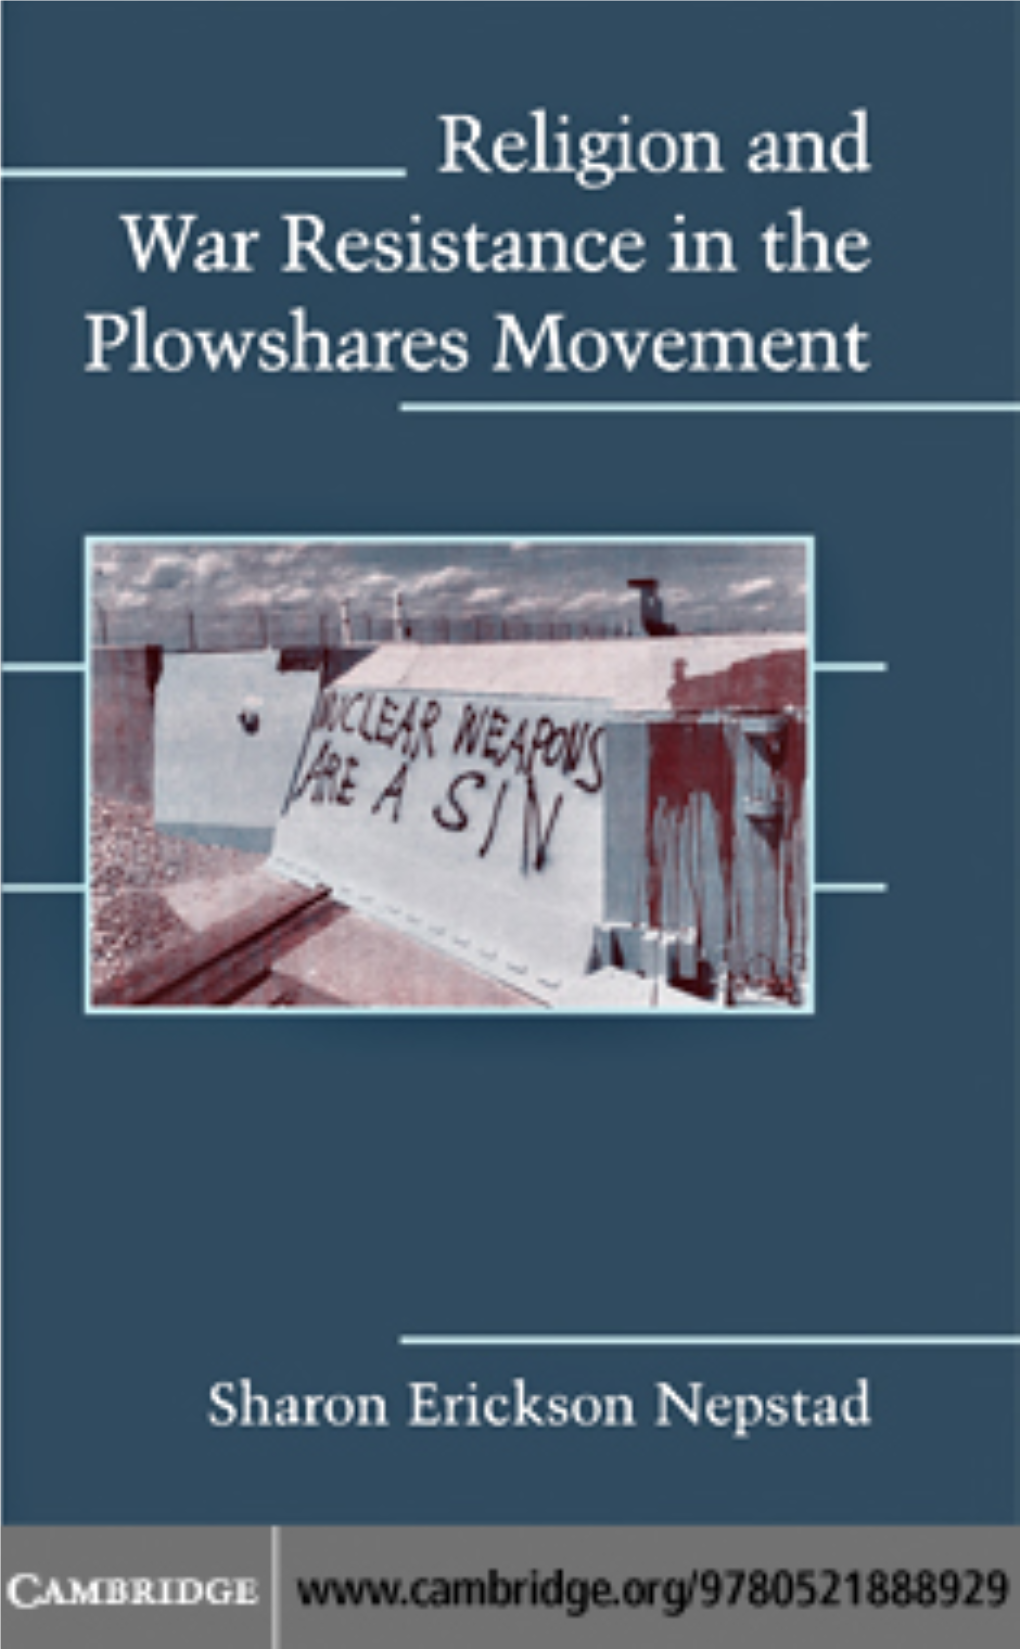 Religion and War Resistance in the Plowshares Movement (Cambridge